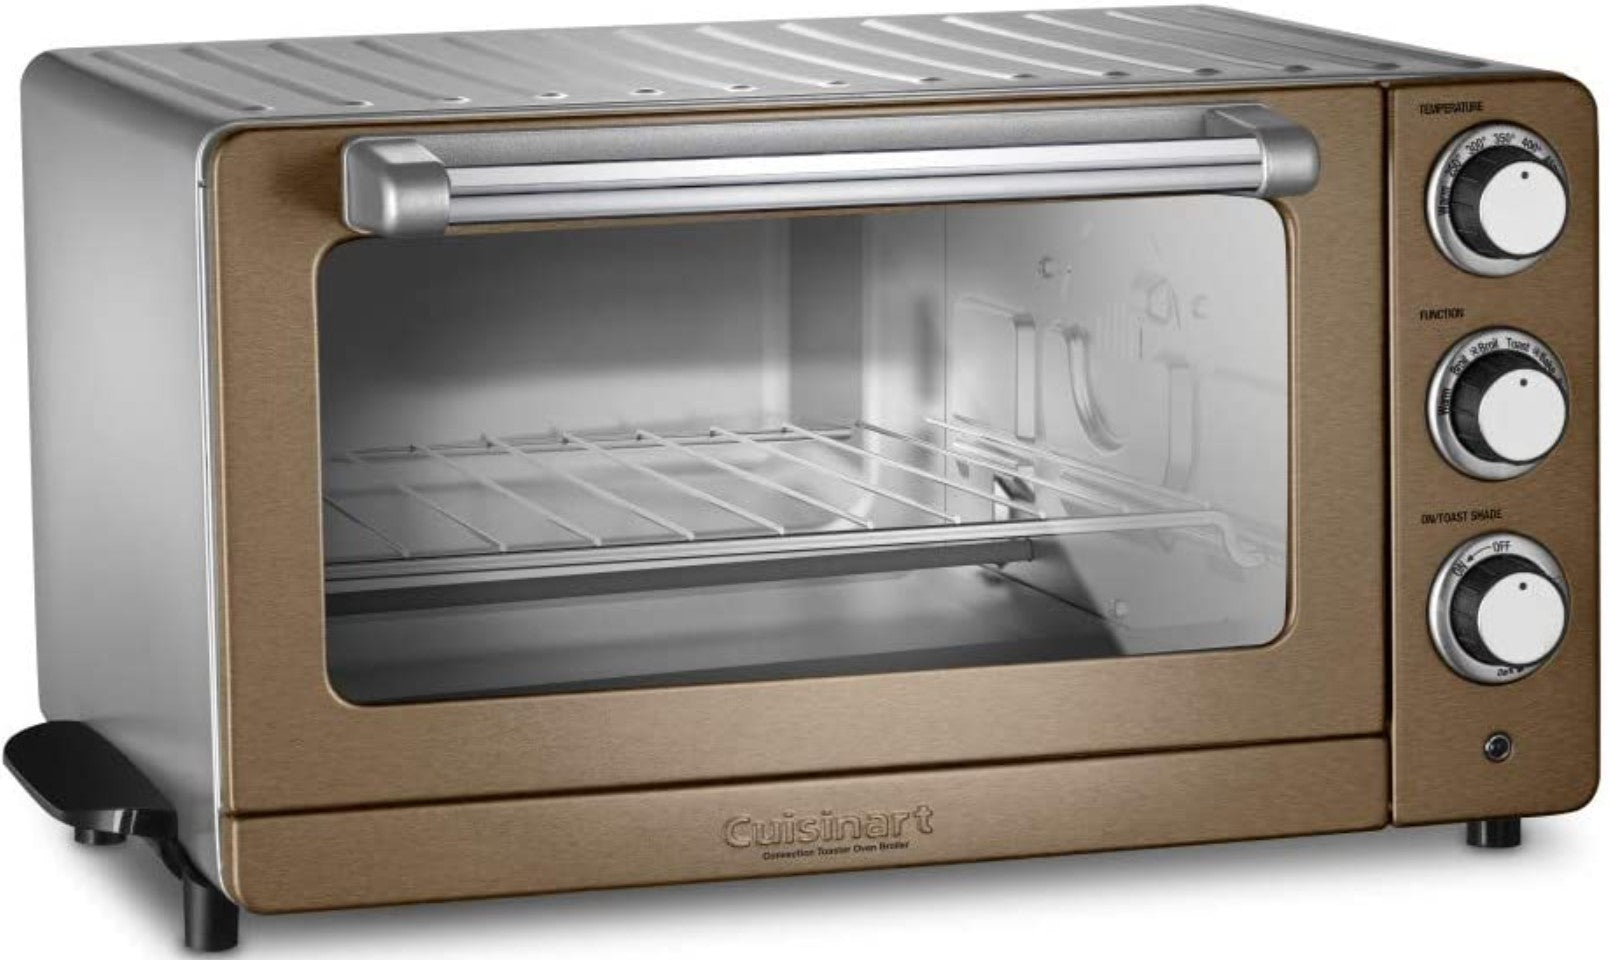 Cuisinart TOB-60N1CSFR Convection Toaster Oven Broiler Copper - Certified Refurbished